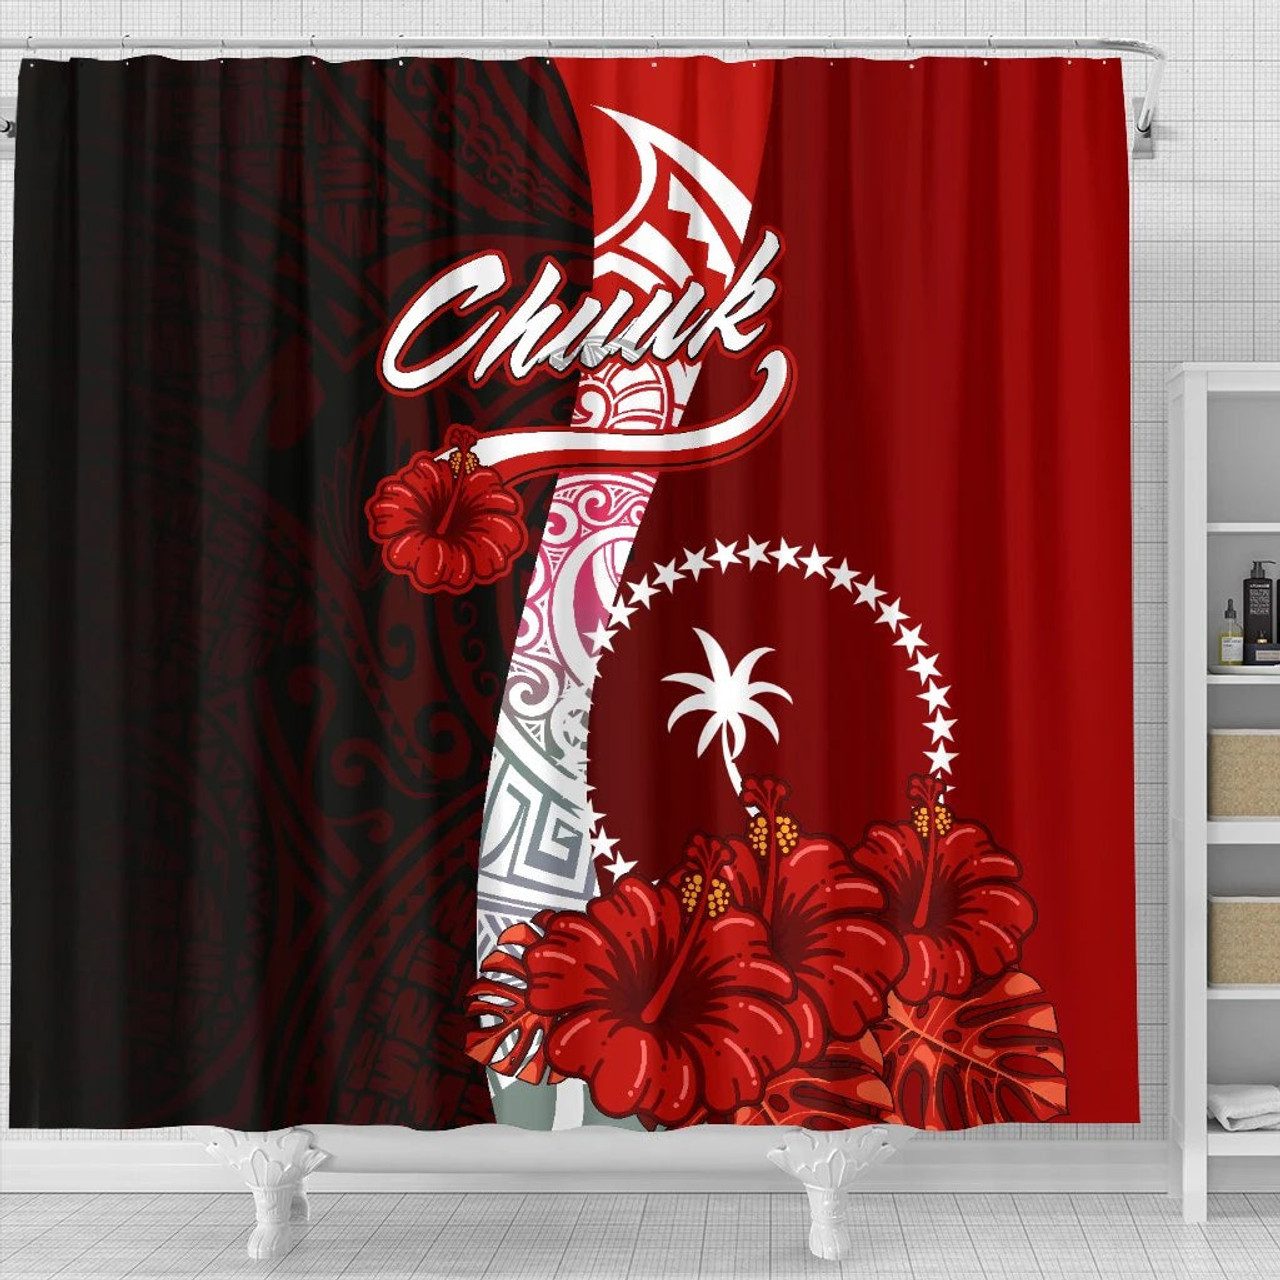 Chuuk Micronesia Shower Curtain - Coat Of Arm With Hibiscus 4